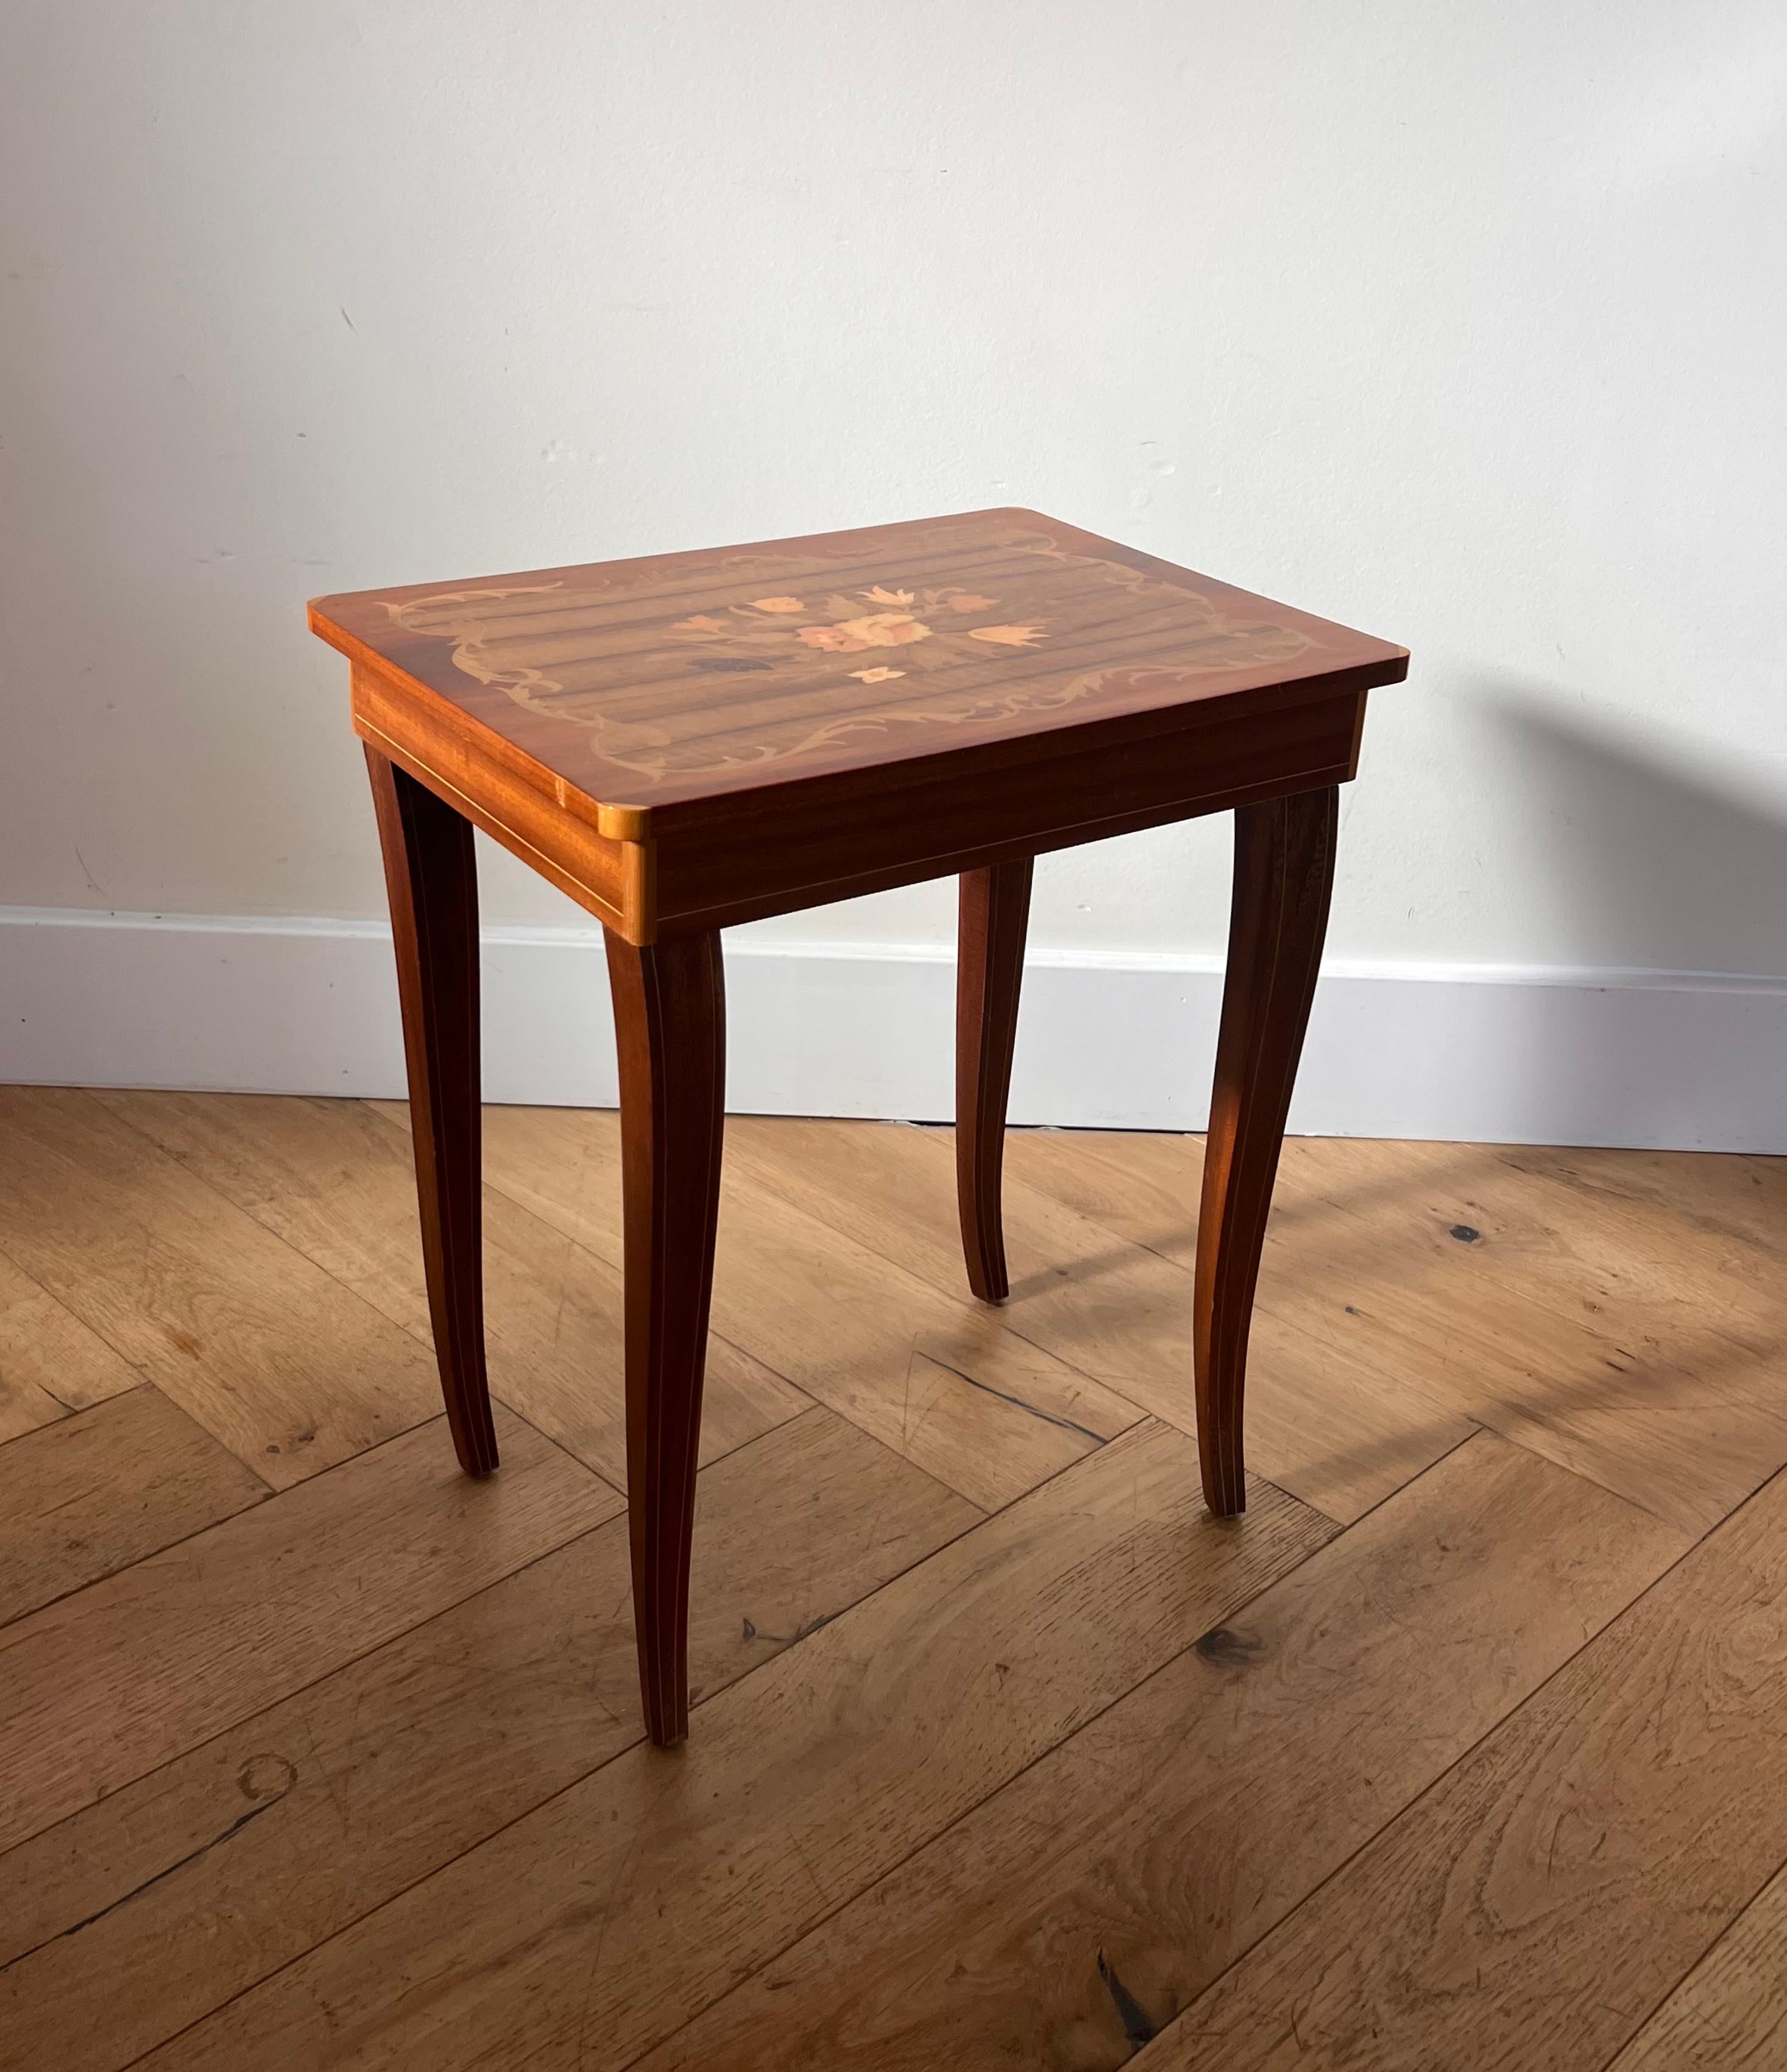 A delightful little Italian marquetry side table which opens to reveal a whimsical melody from a hidden music-box. Made in Italy circa late 1950s, this piece recalls baroque and rococo sensibilities. Good condition with minor signs of age.